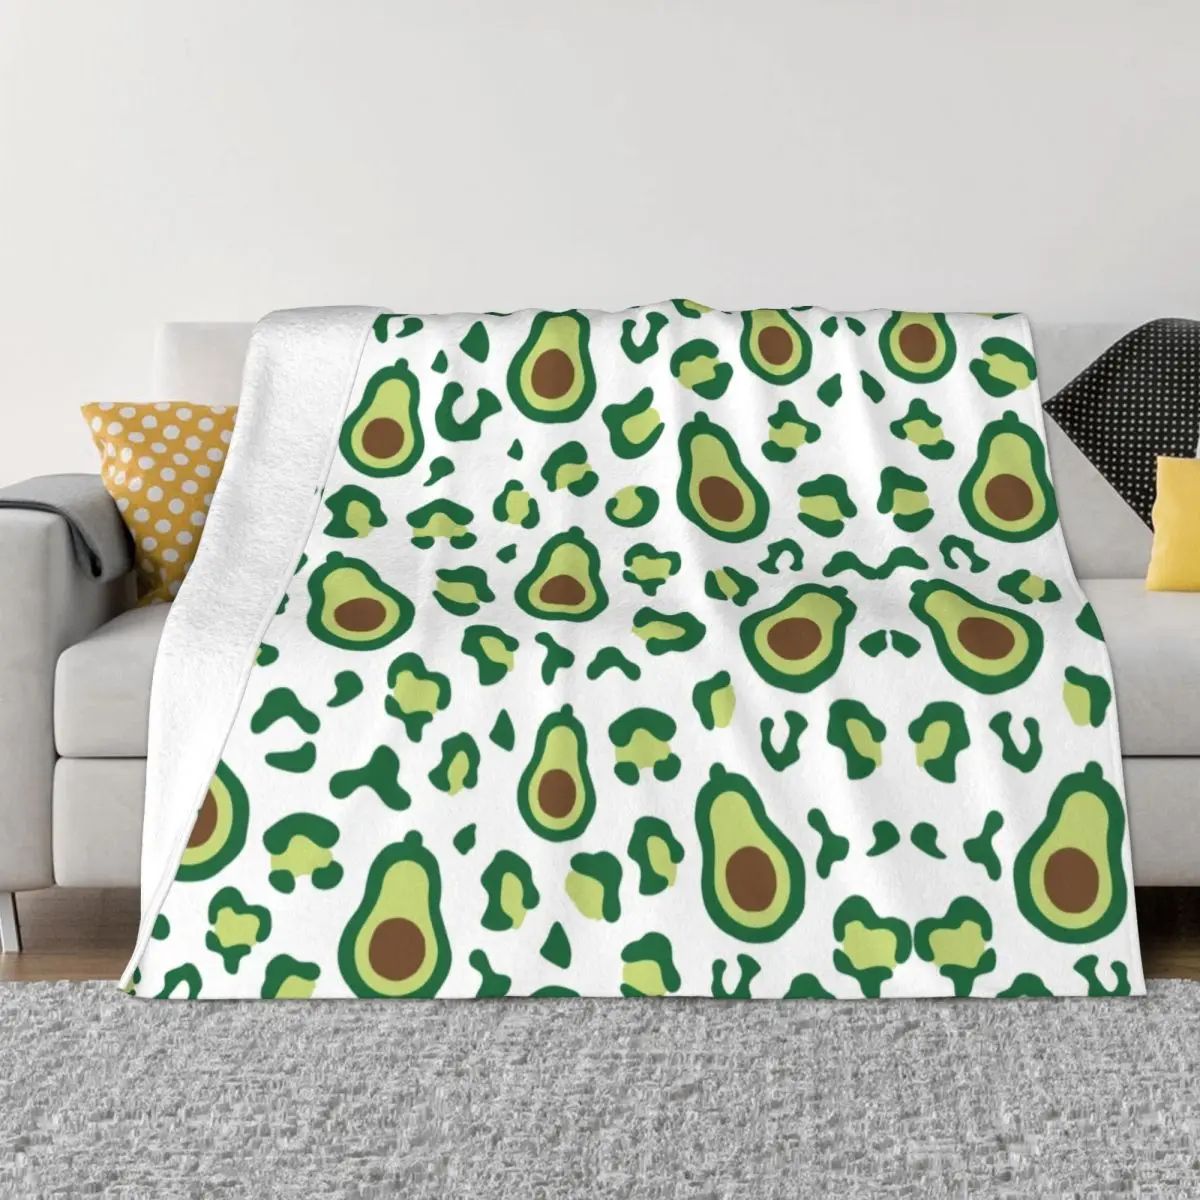 

Red Avo Cardio Funny Fitness Avocado Pattern Fleece Warm Flannel Throw Blankets for Sofa Outdoor Bedding Bedspread Blanket Soft